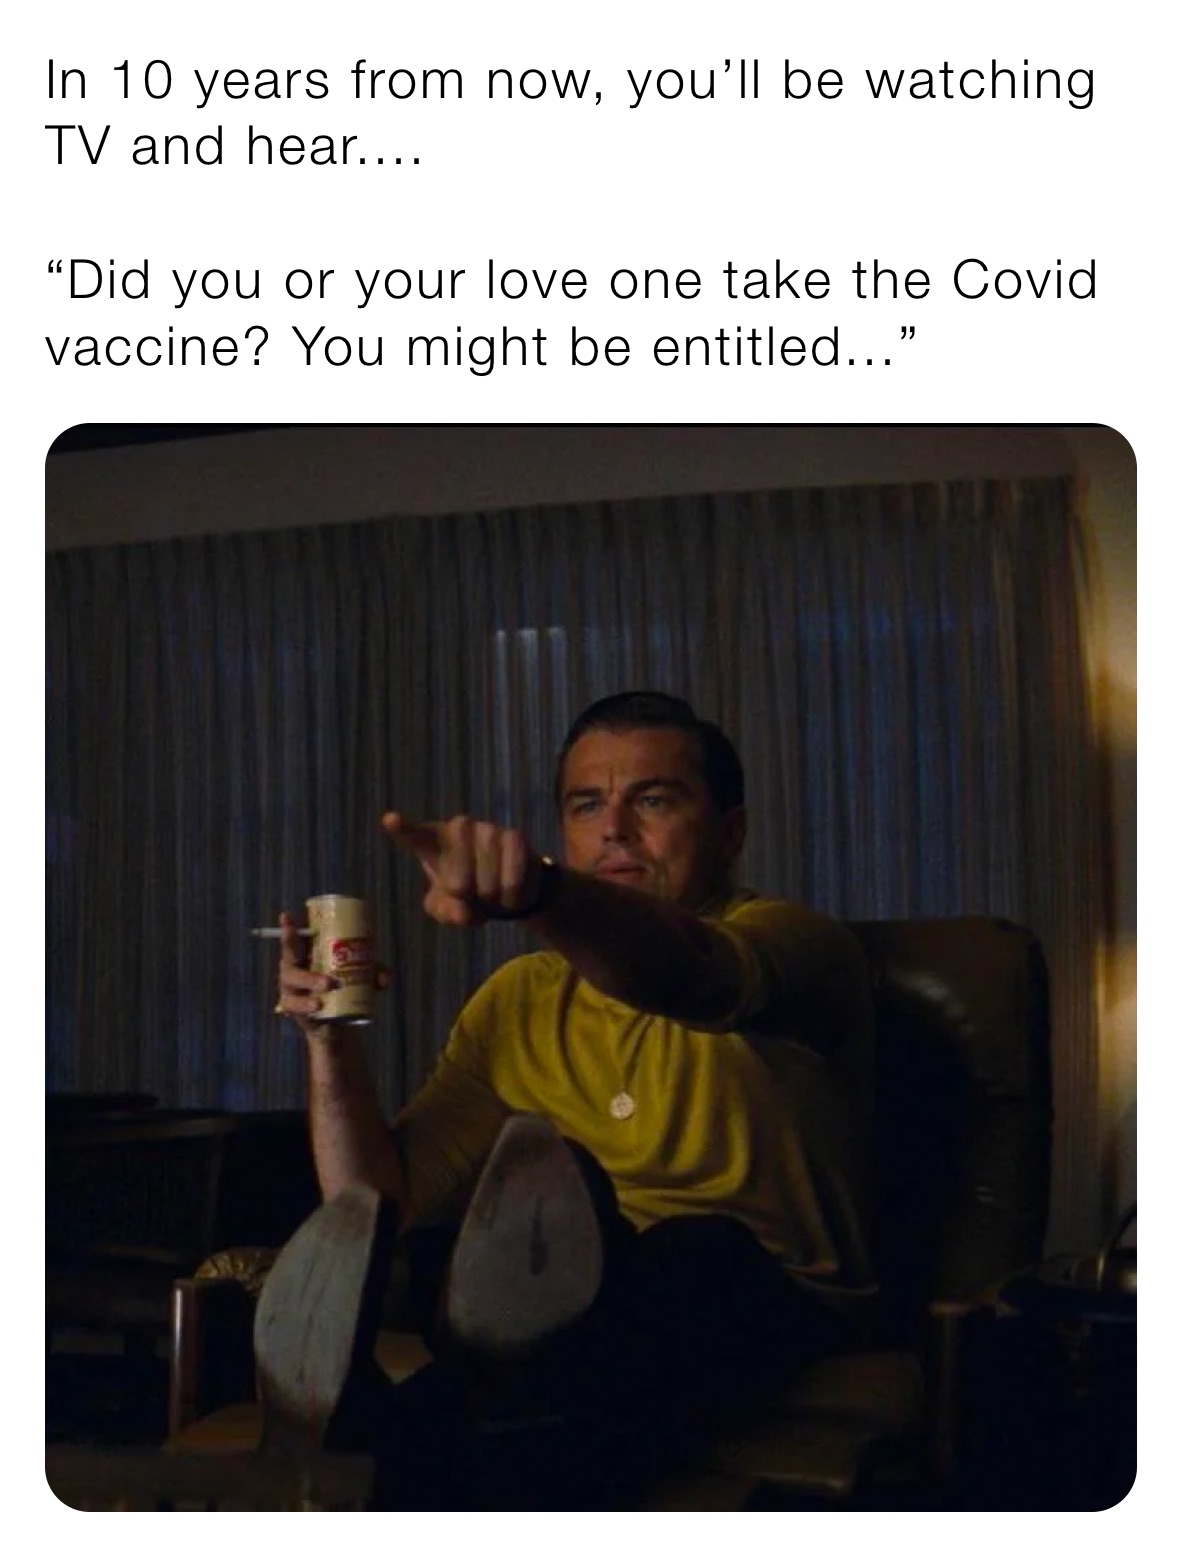 In 10 years from now, you’ll be watching TV and hear.... 

“Did you or your love one take the Covid vaccine? You might be entitled...”